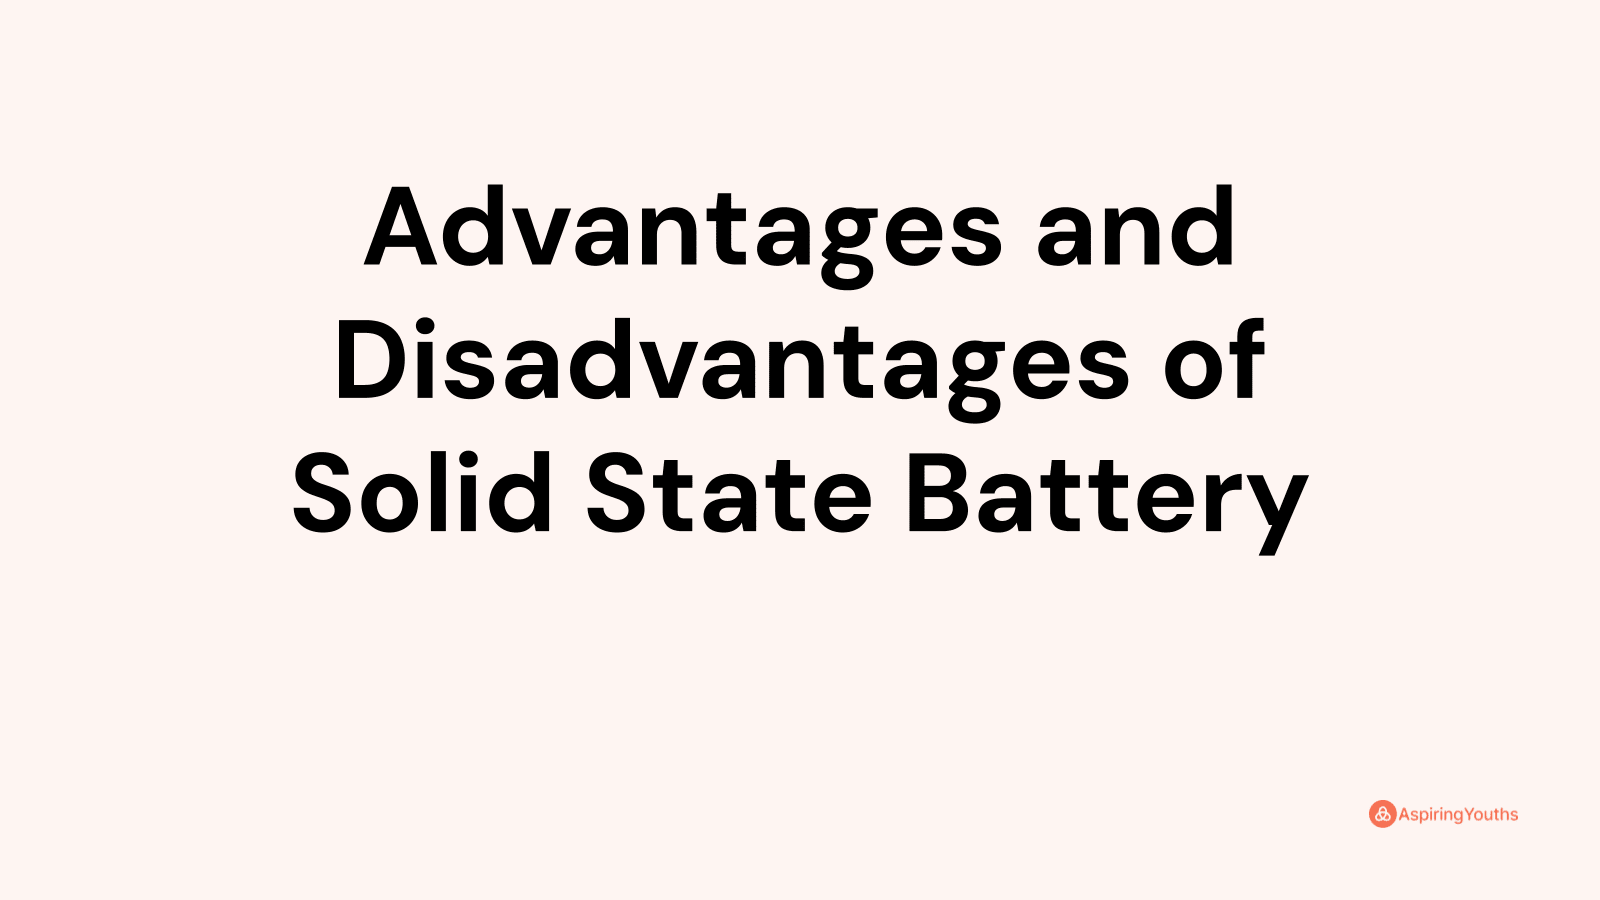 Advantages and disadvantages of Solid State Battery